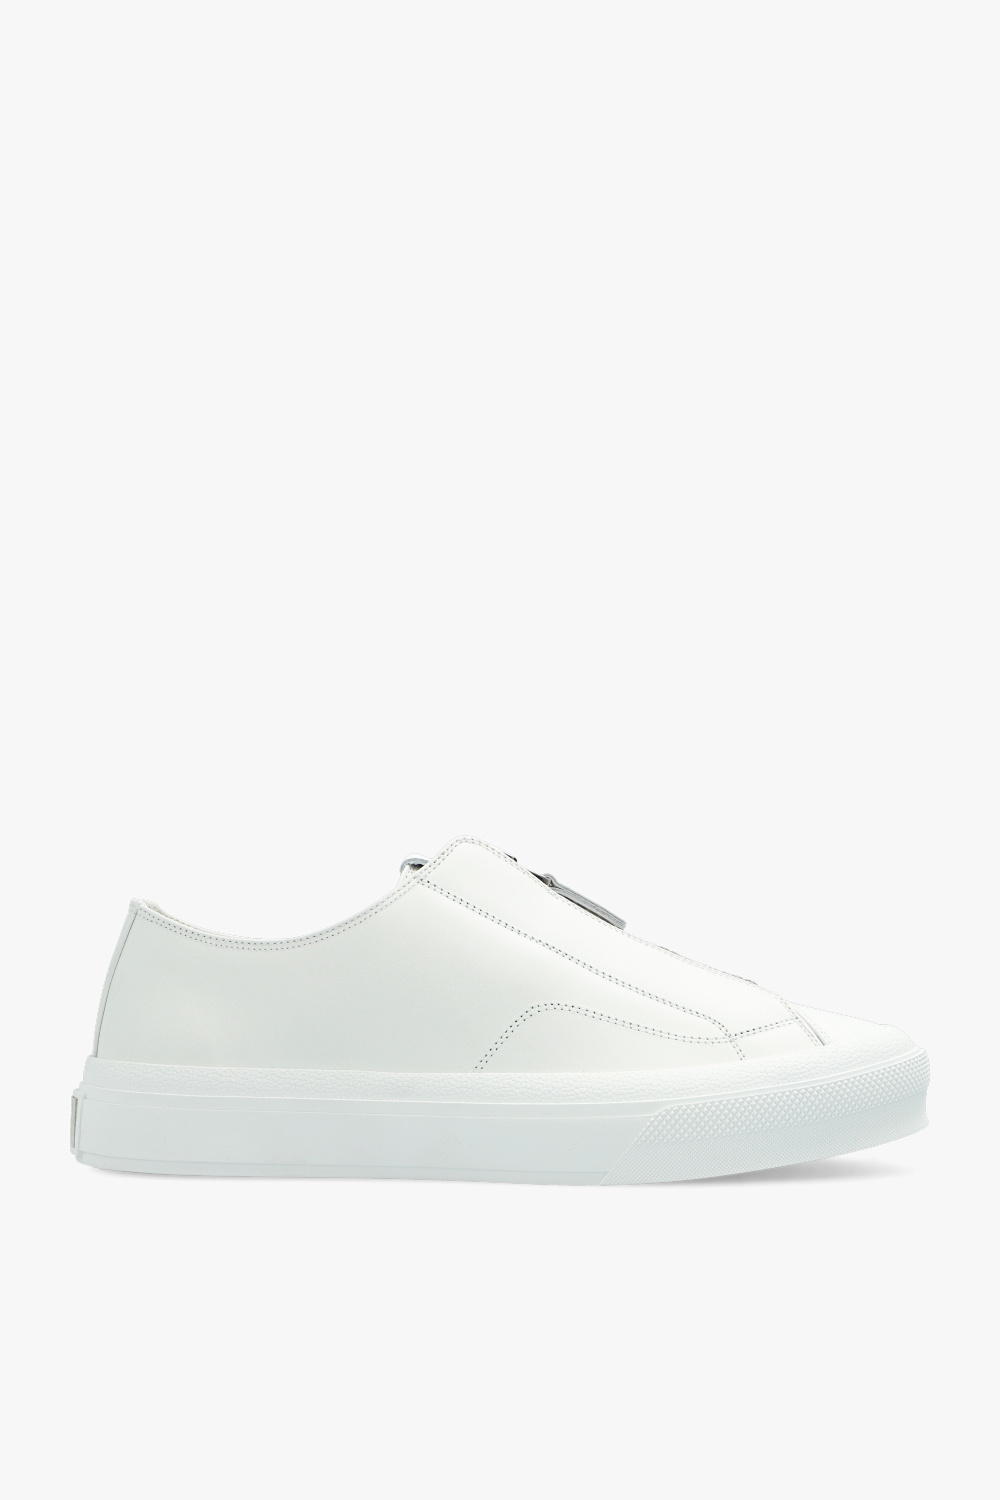 givenchy KASZMIROWY ‘City’ sneakers